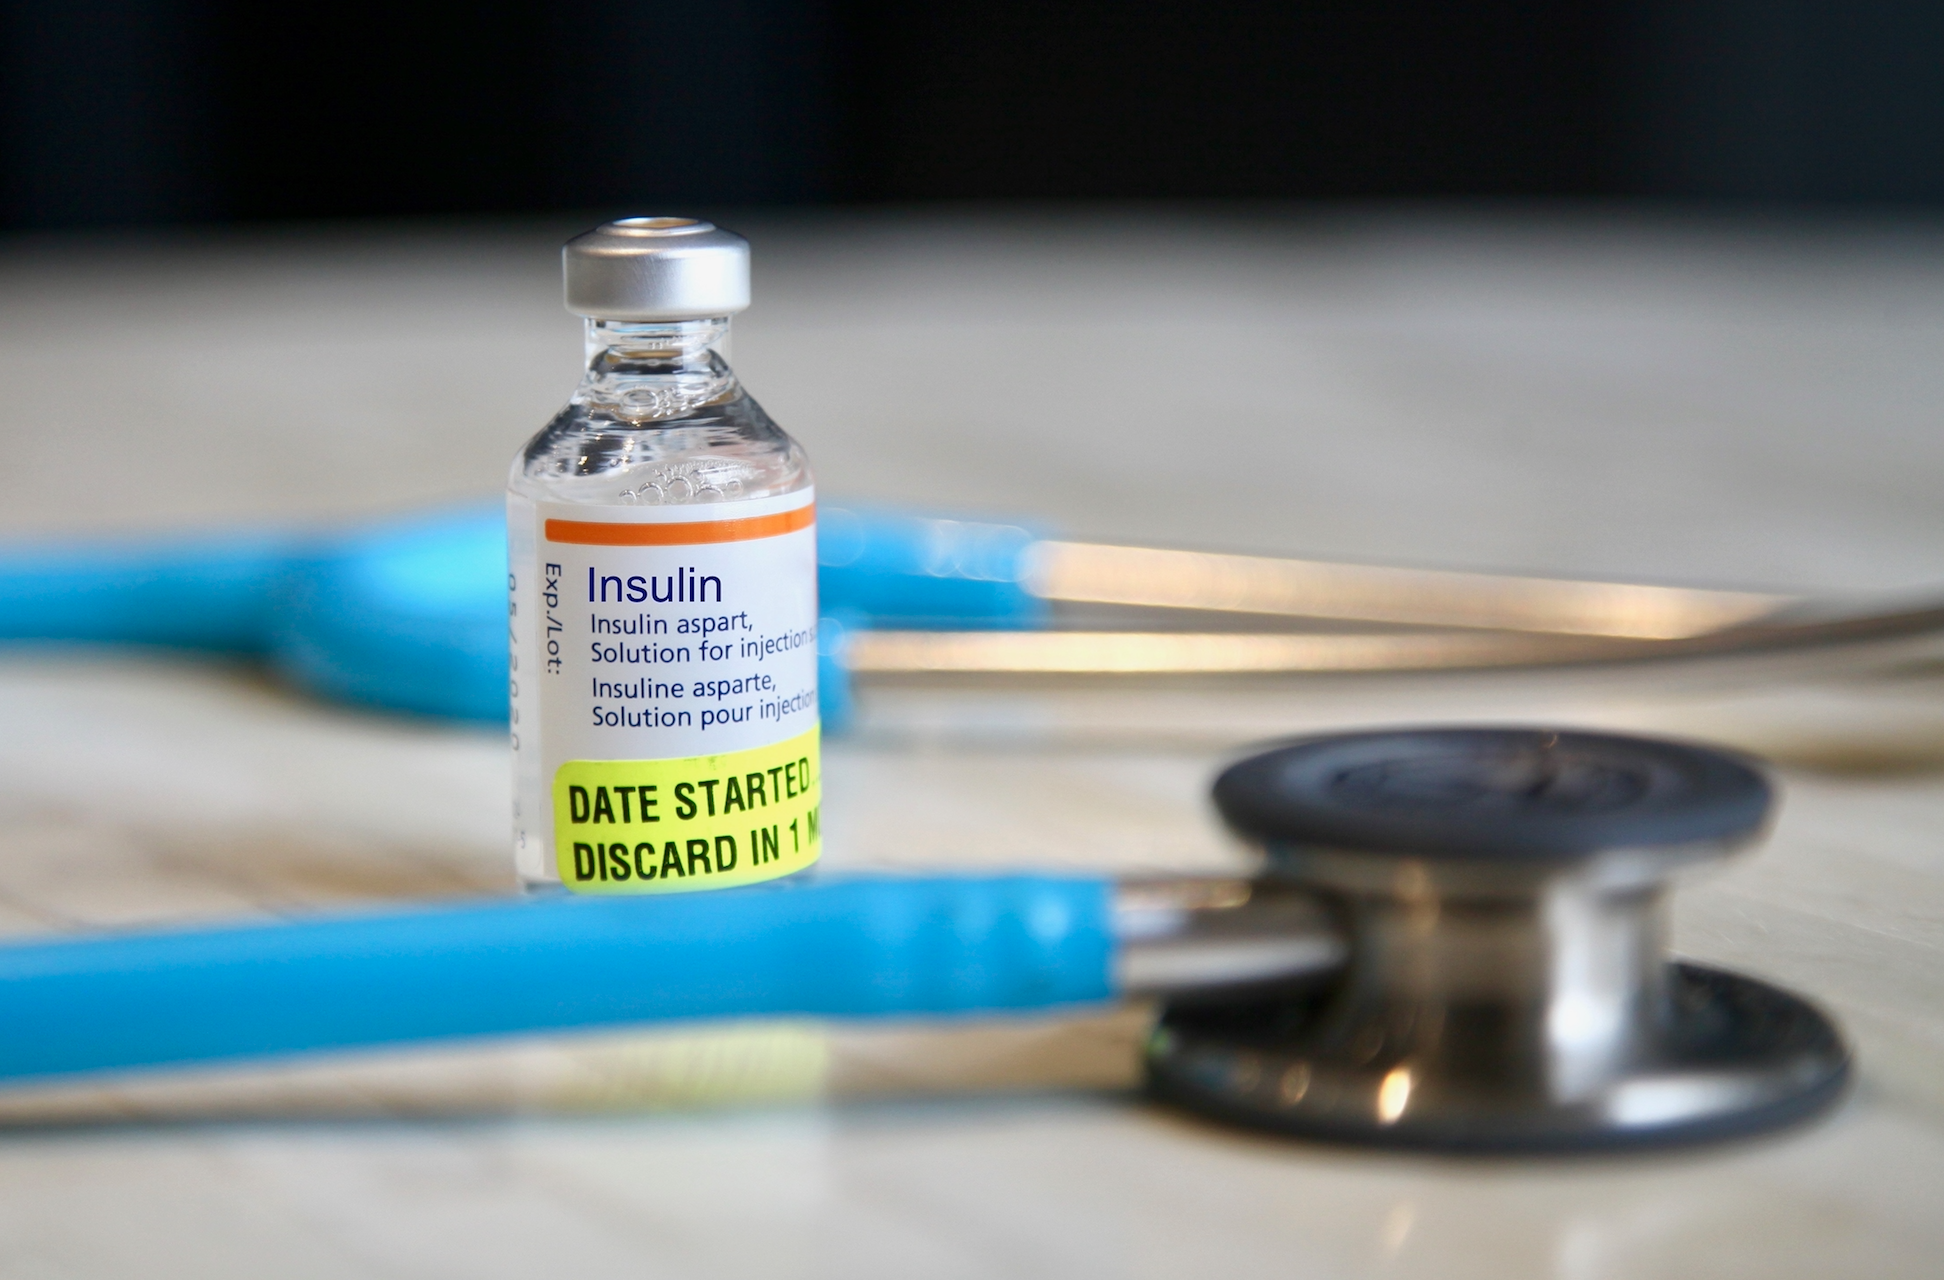 KFF: $ 35 monthly insulin cost cap could benefit 1 in 4 Americans in individual, small group plans